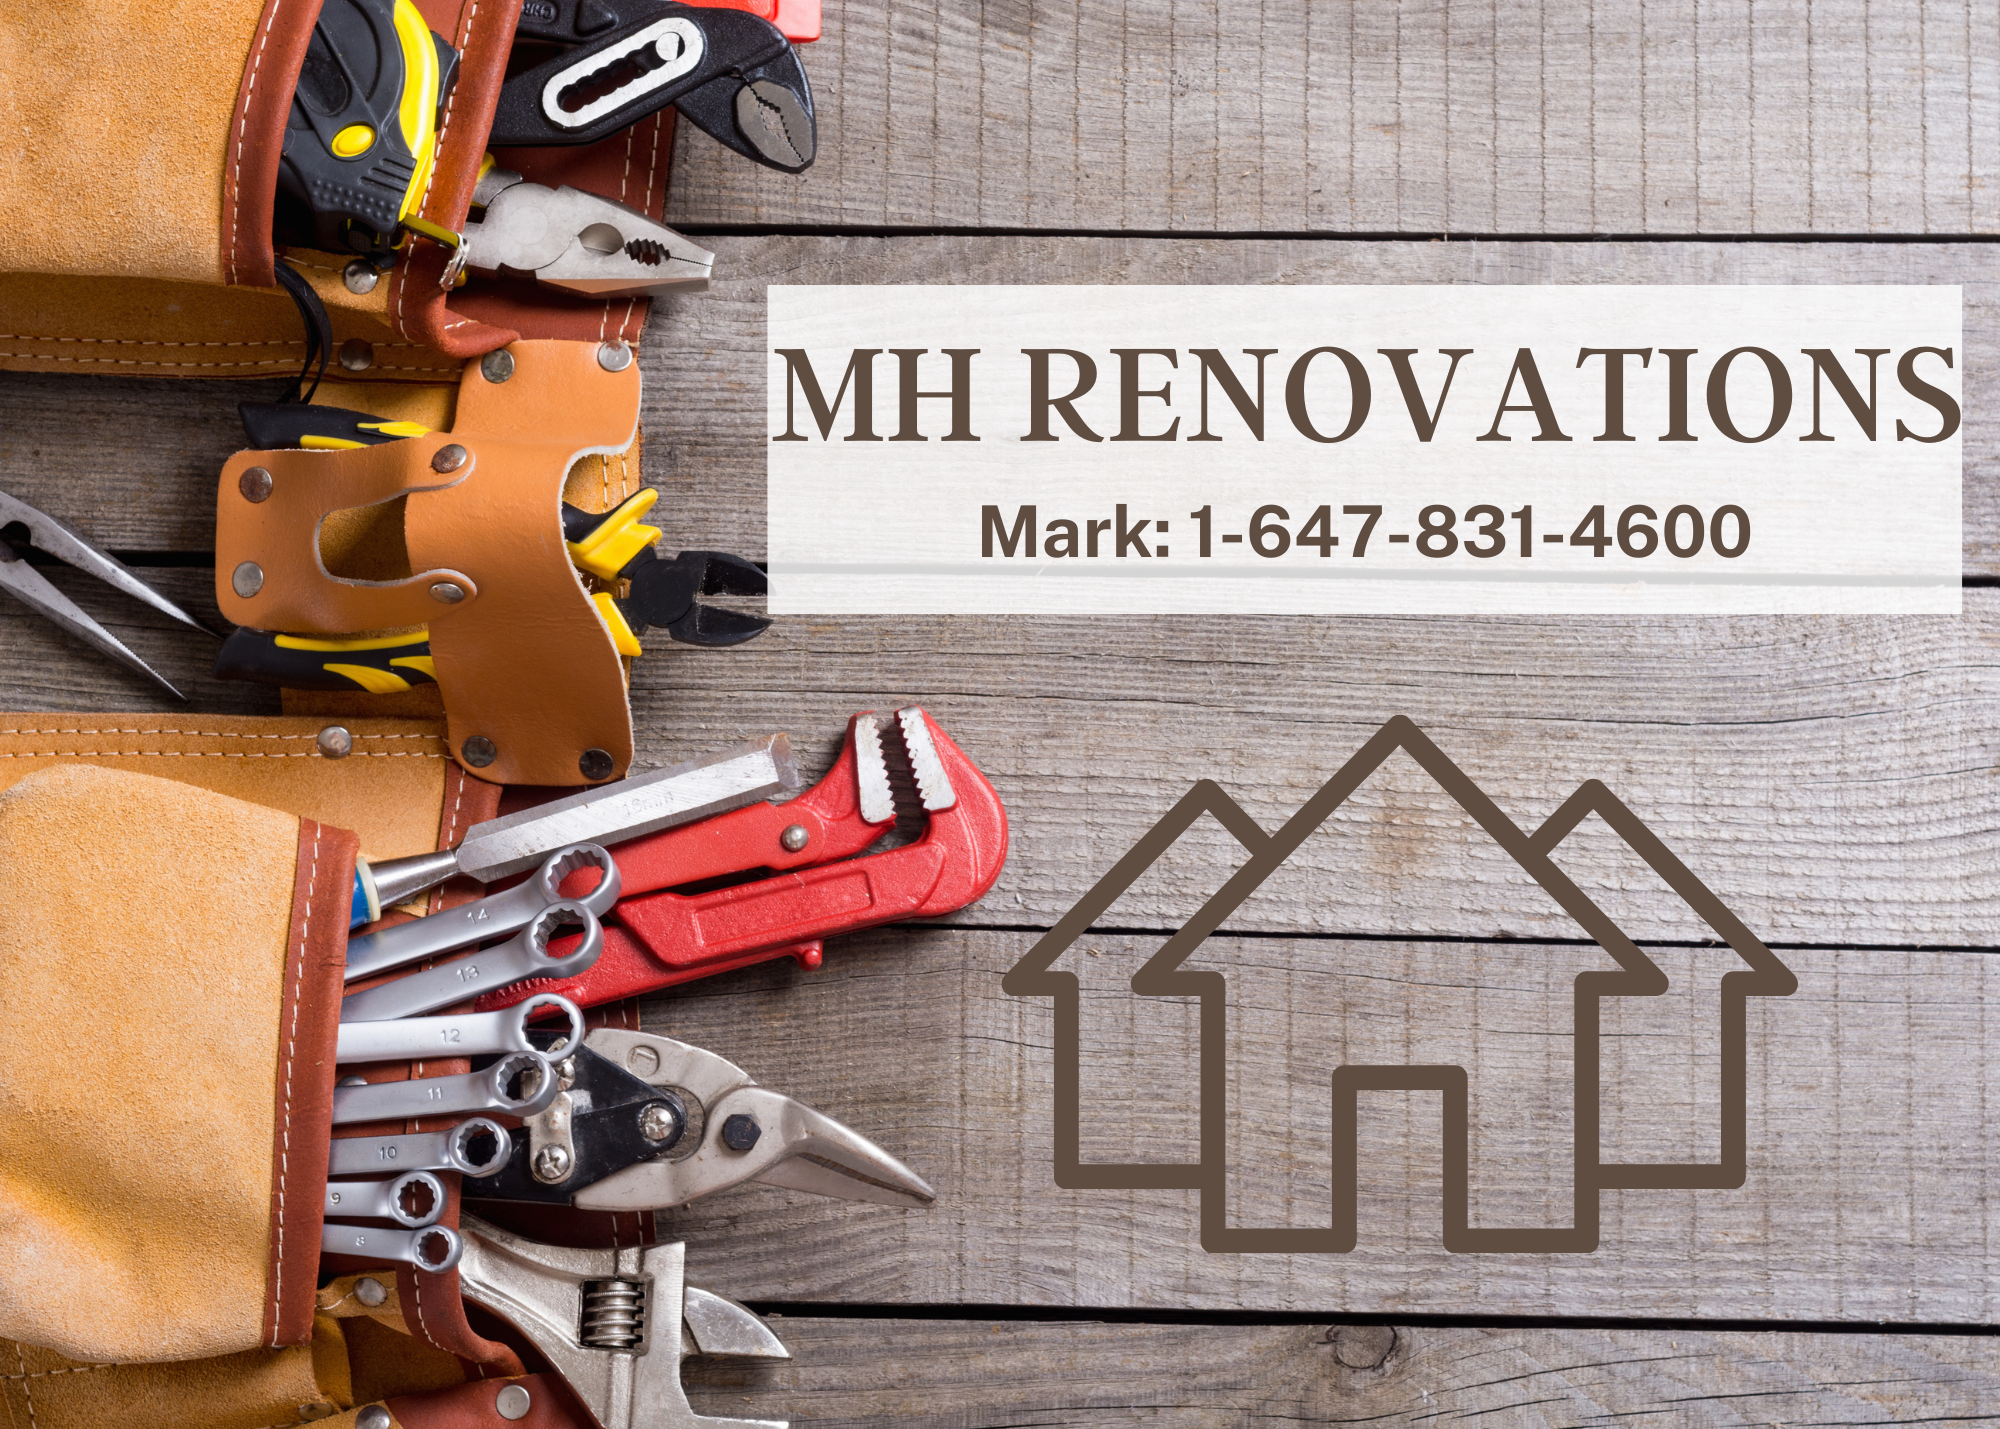 MH Home renovations advertisement